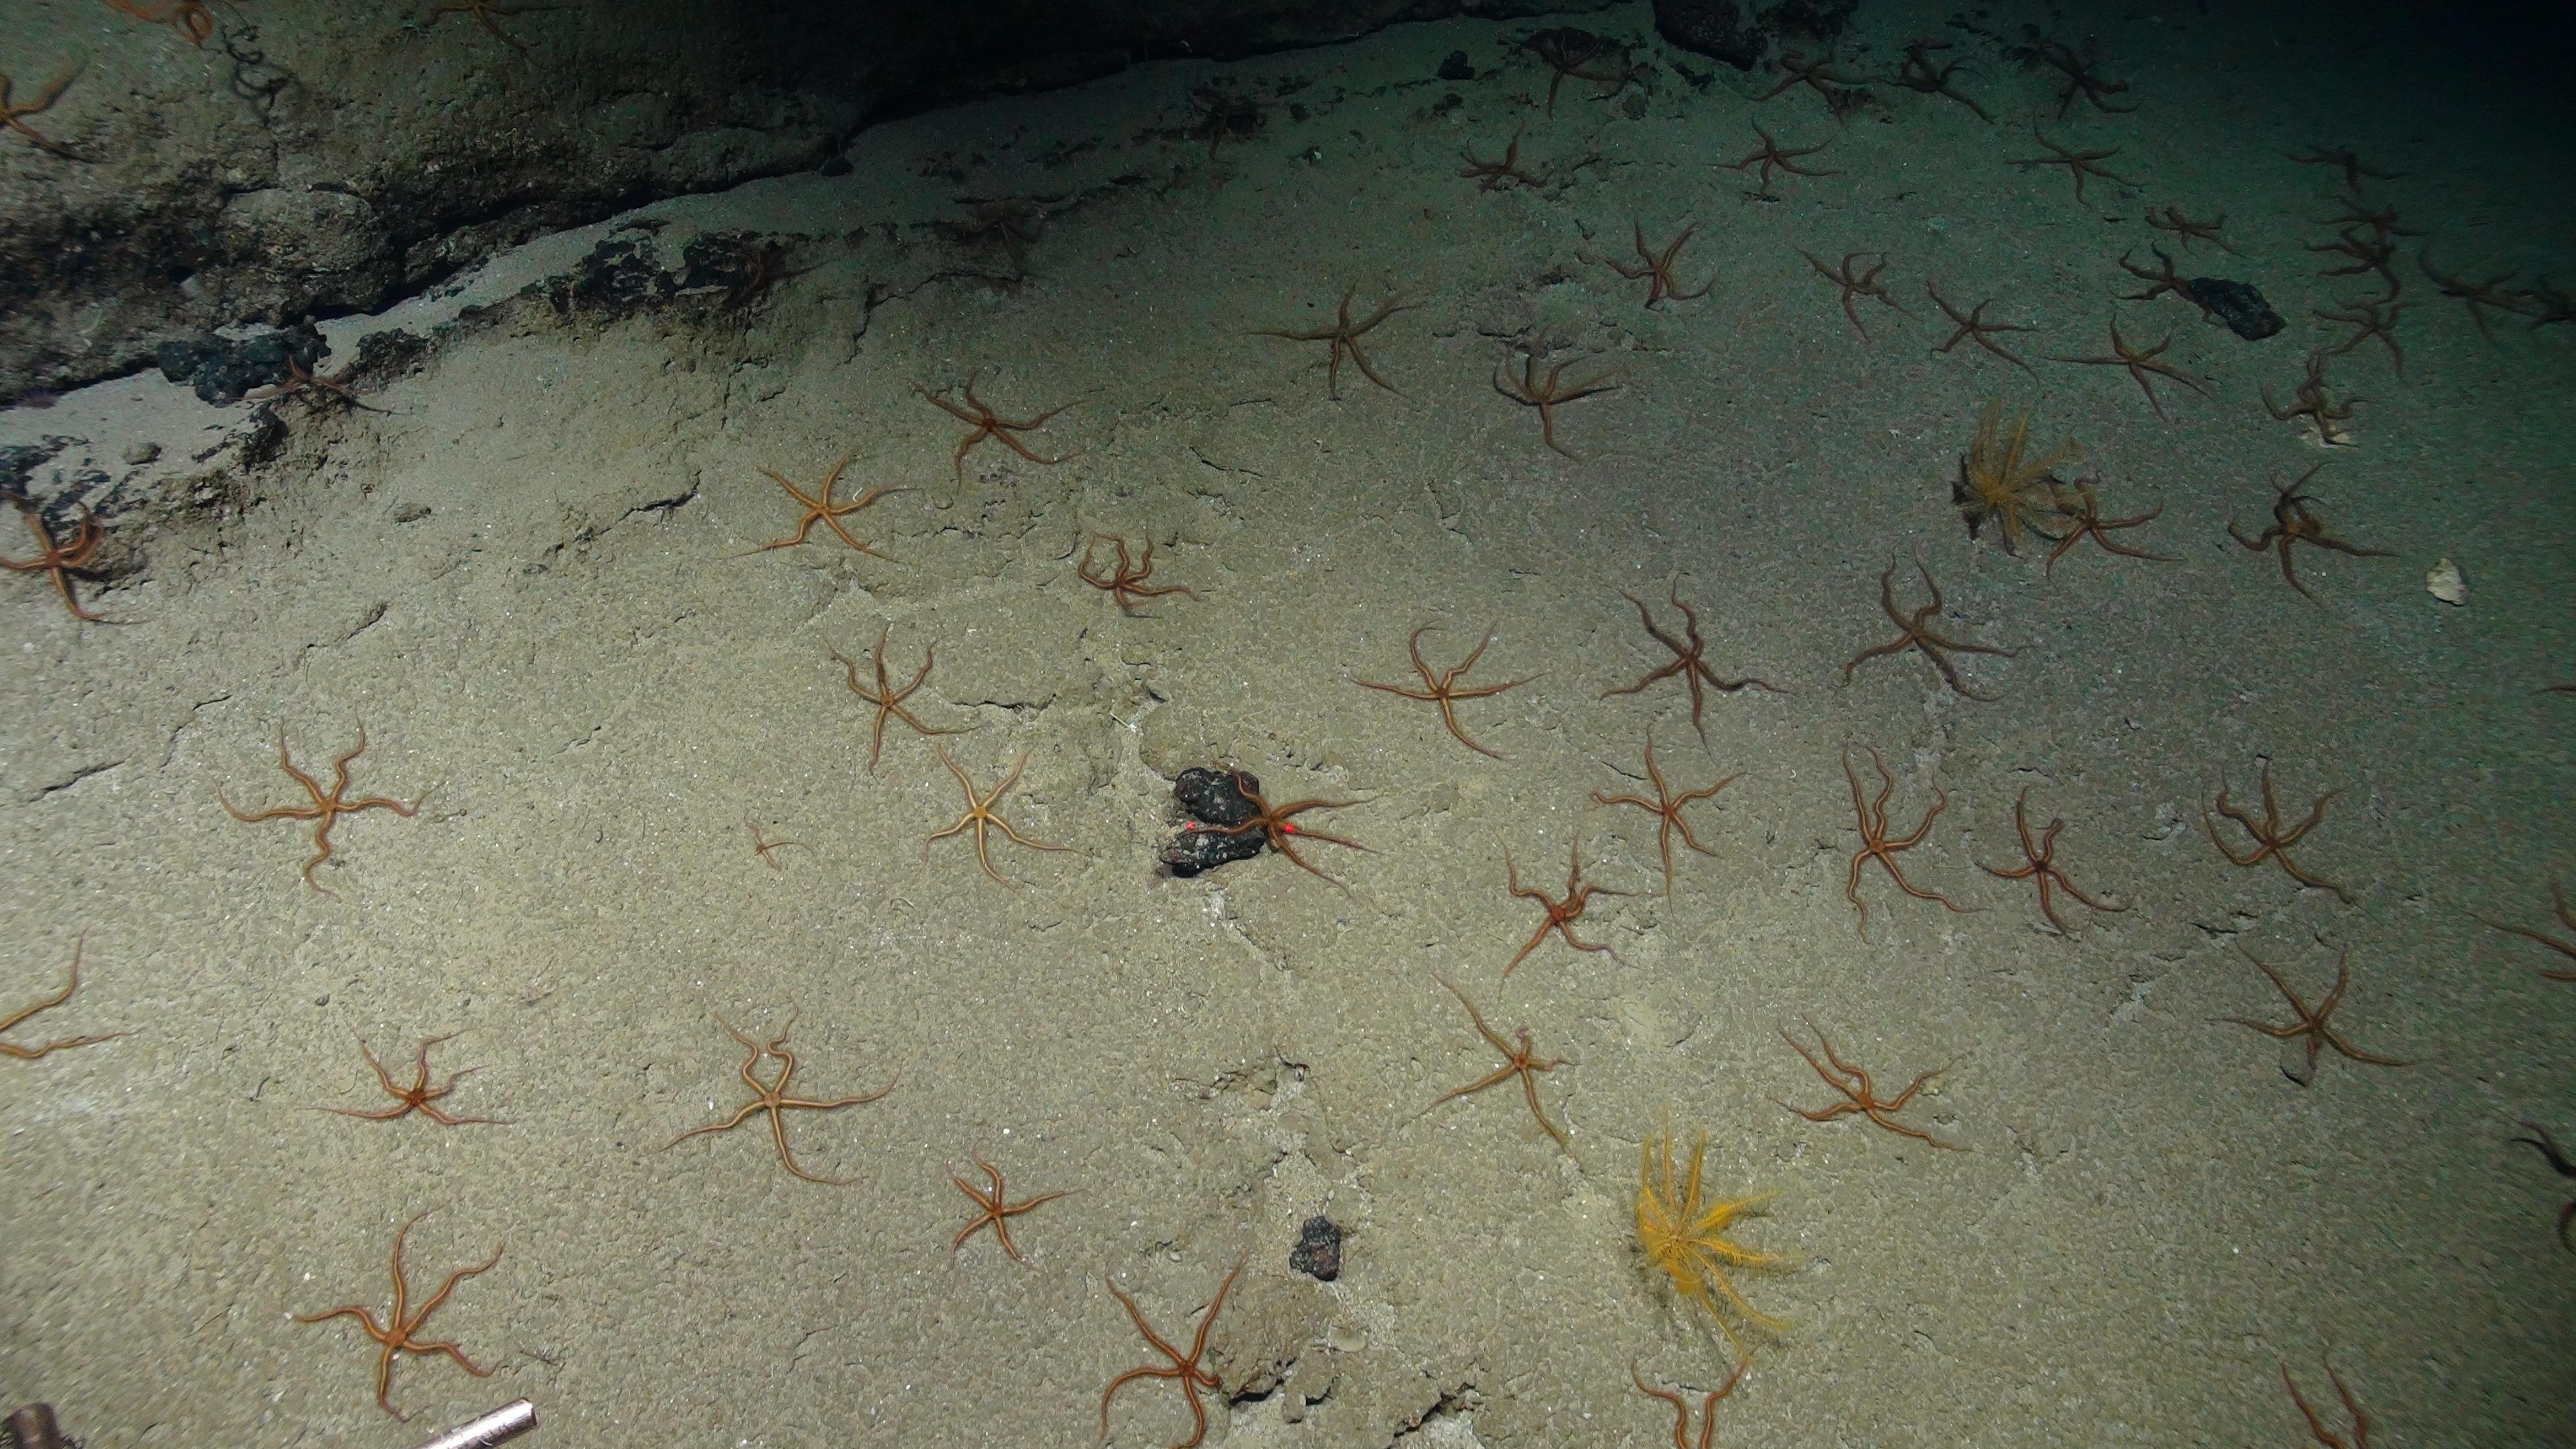 Brittle star haven Photo by: ISIS